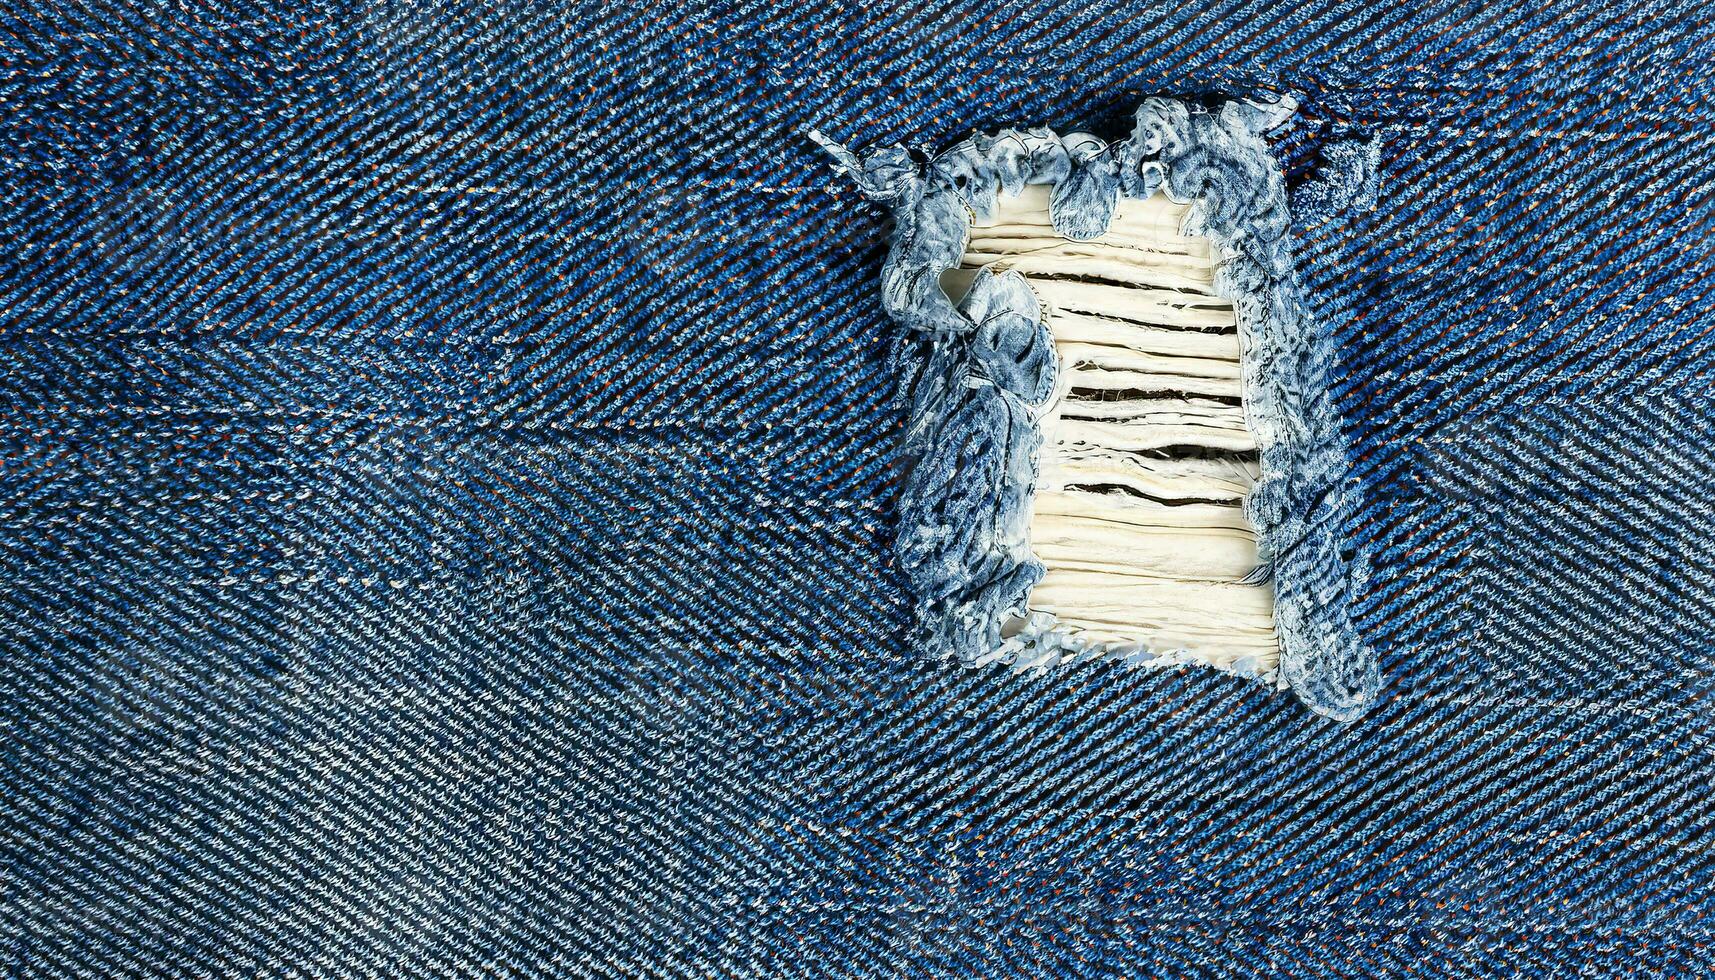 AI generated Blue jeans with a white stripe that has been torn off, Destroyed torn denim blue jeans texture, close-up rip in blue denim fabric, revealing white fabric underneath photo